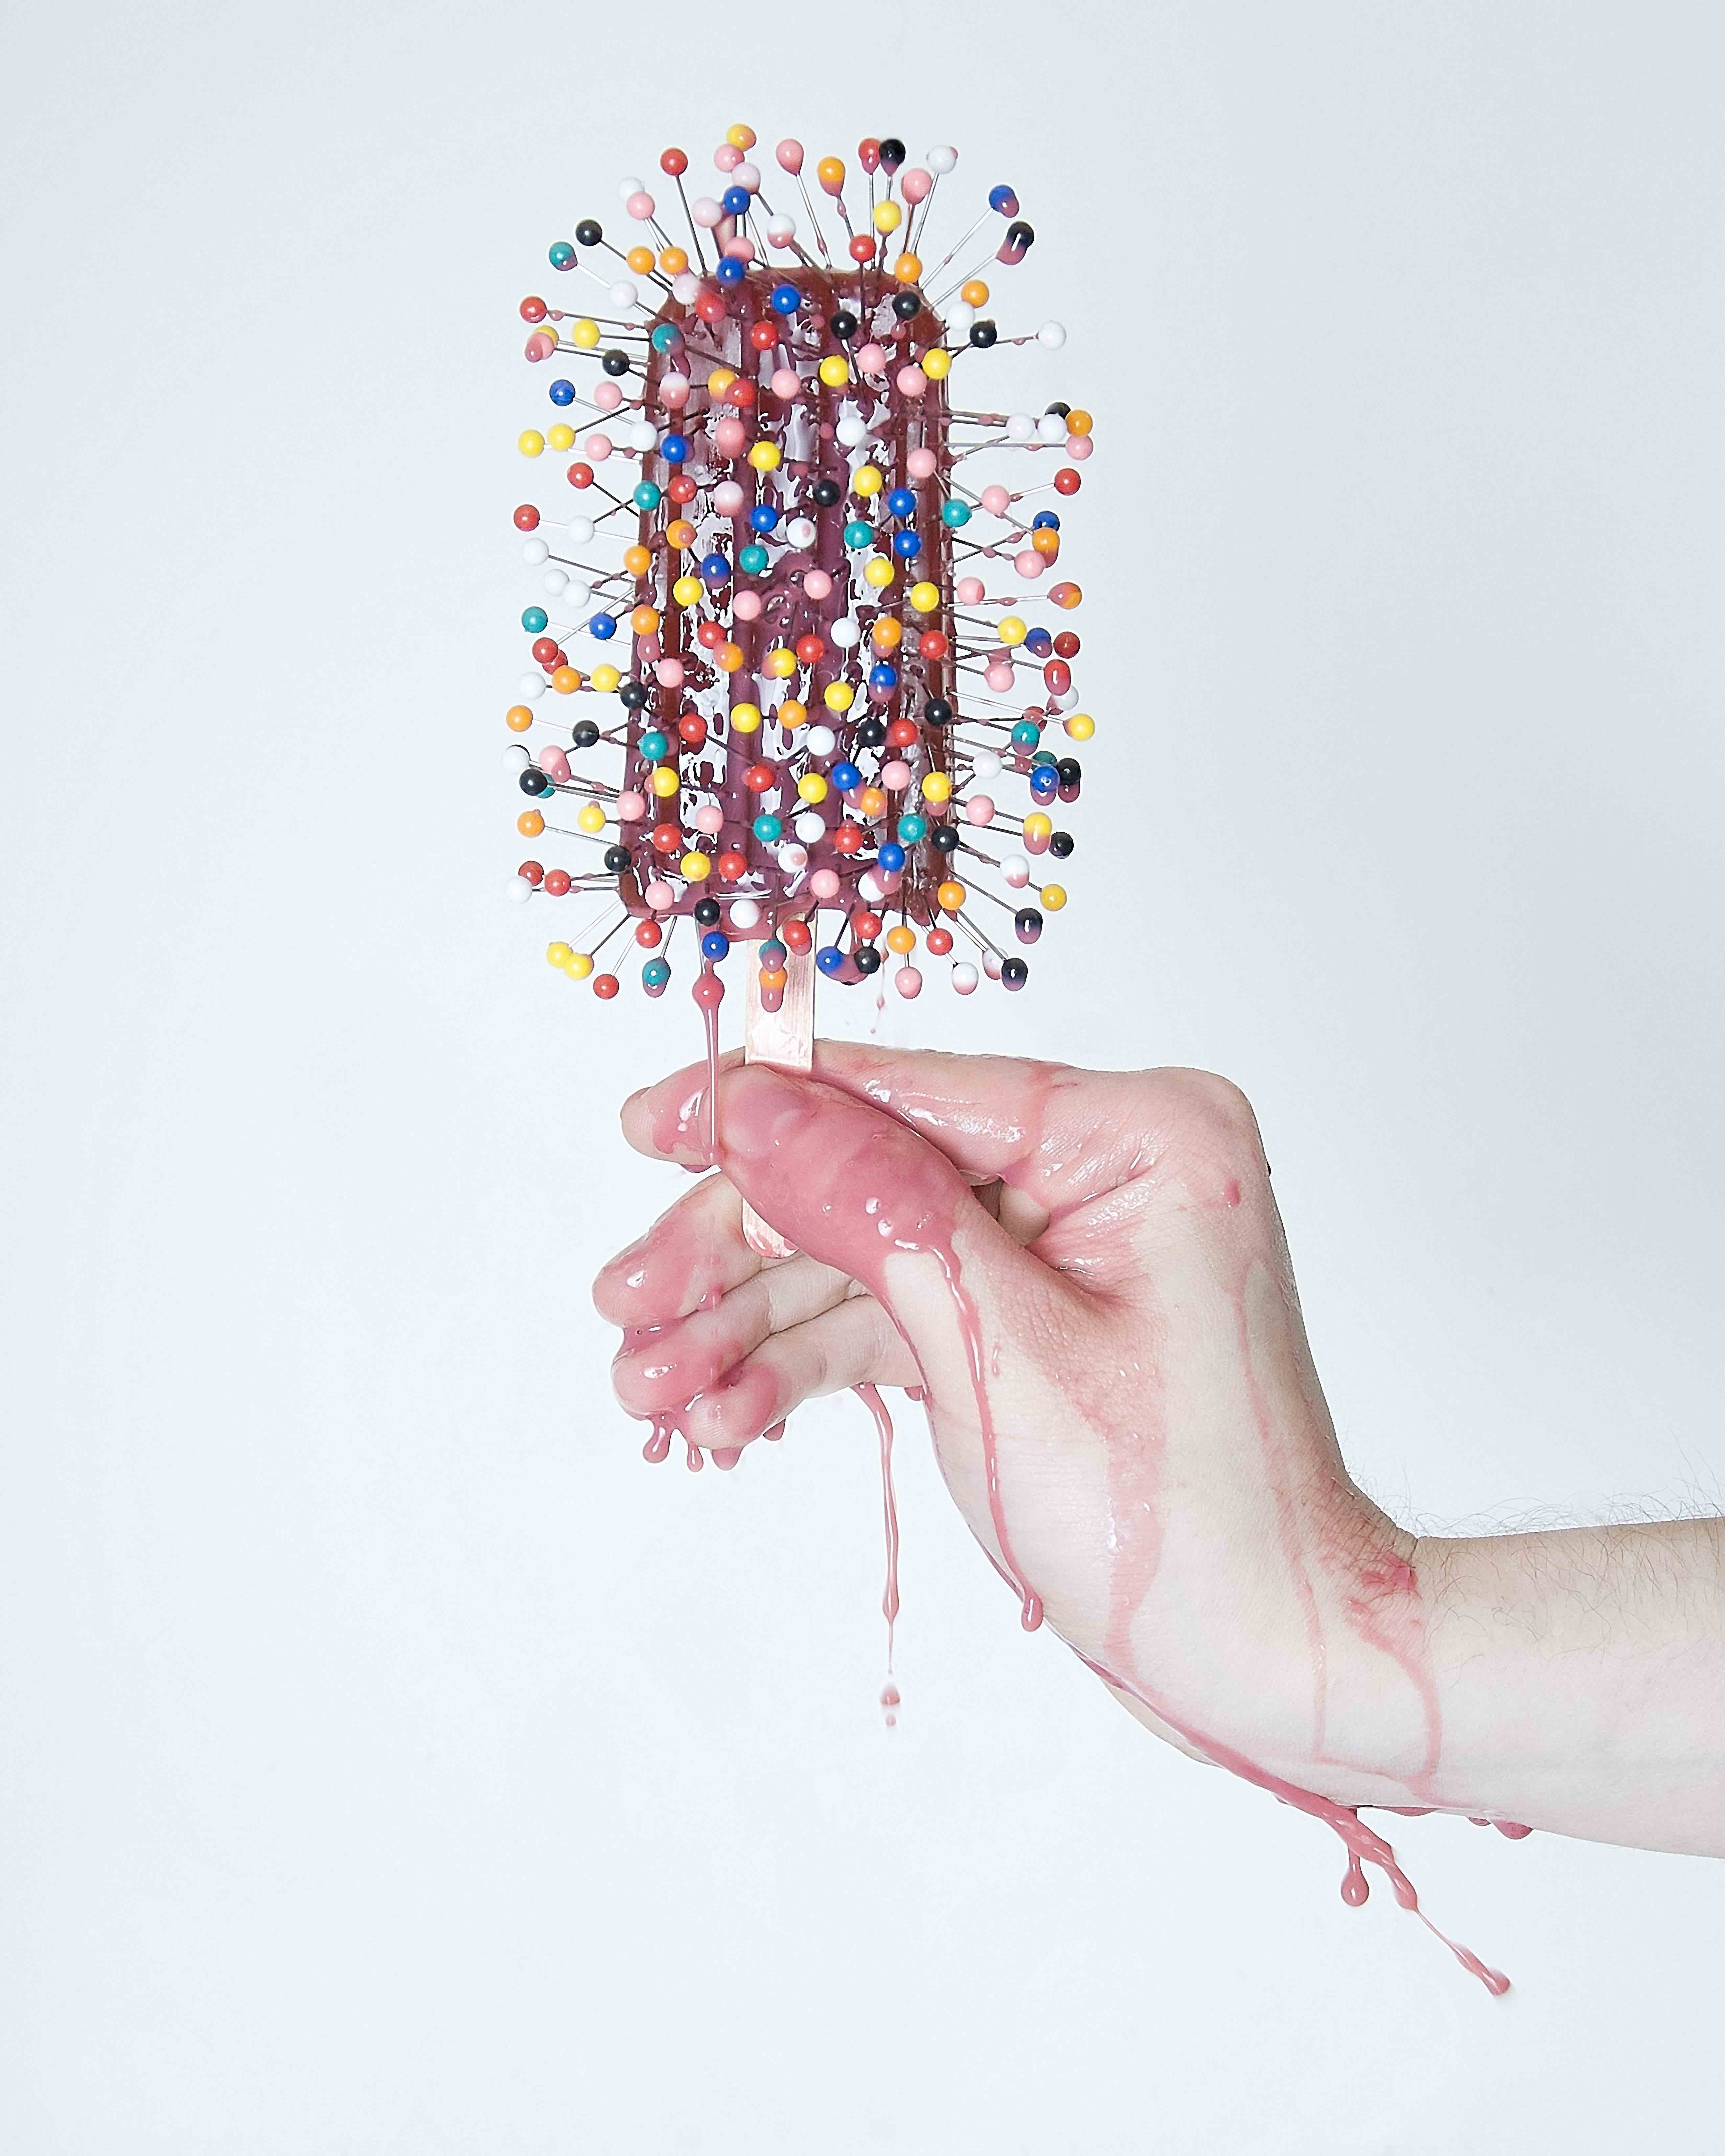 Olivia Locher, Another Day on Earth (Pincushion) 2012, Â© Olivia Locher